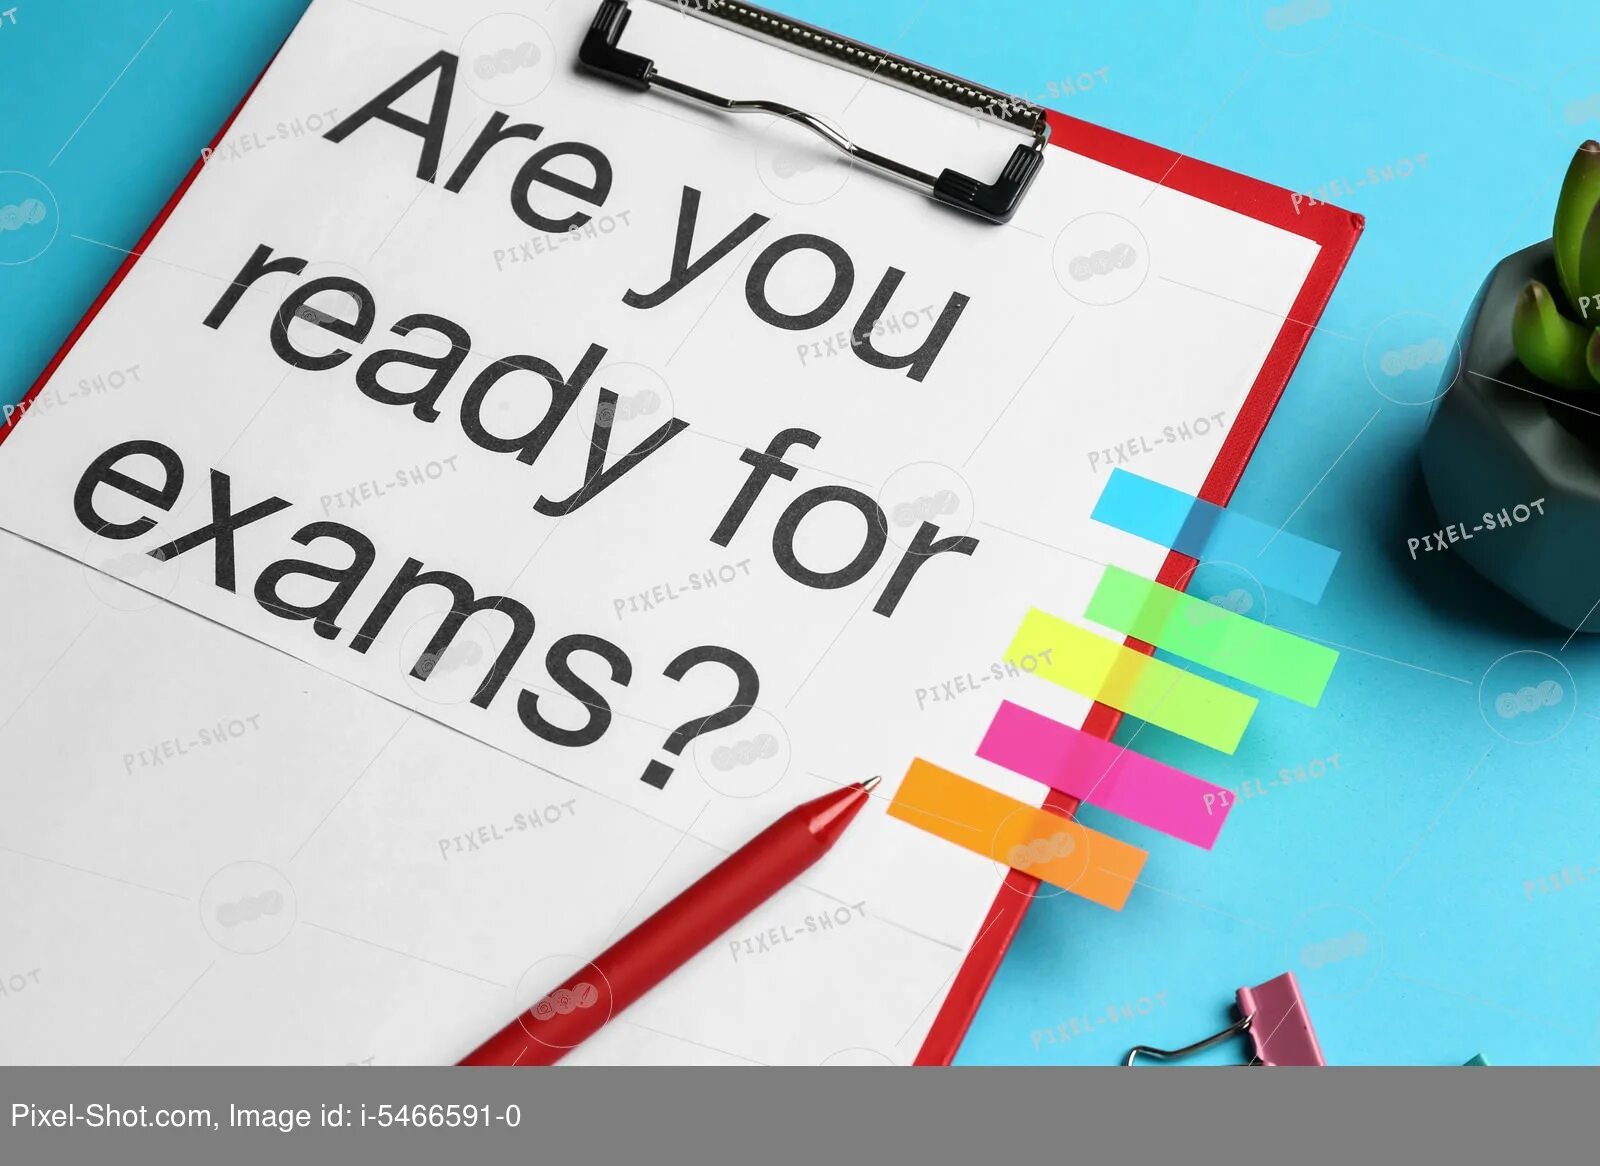 Ready for exams. Are you ready for Exams картинки. Are you ready for Exams на белом фоне картинки. Get ready for Exam. Are you ready for Exams Let's check.